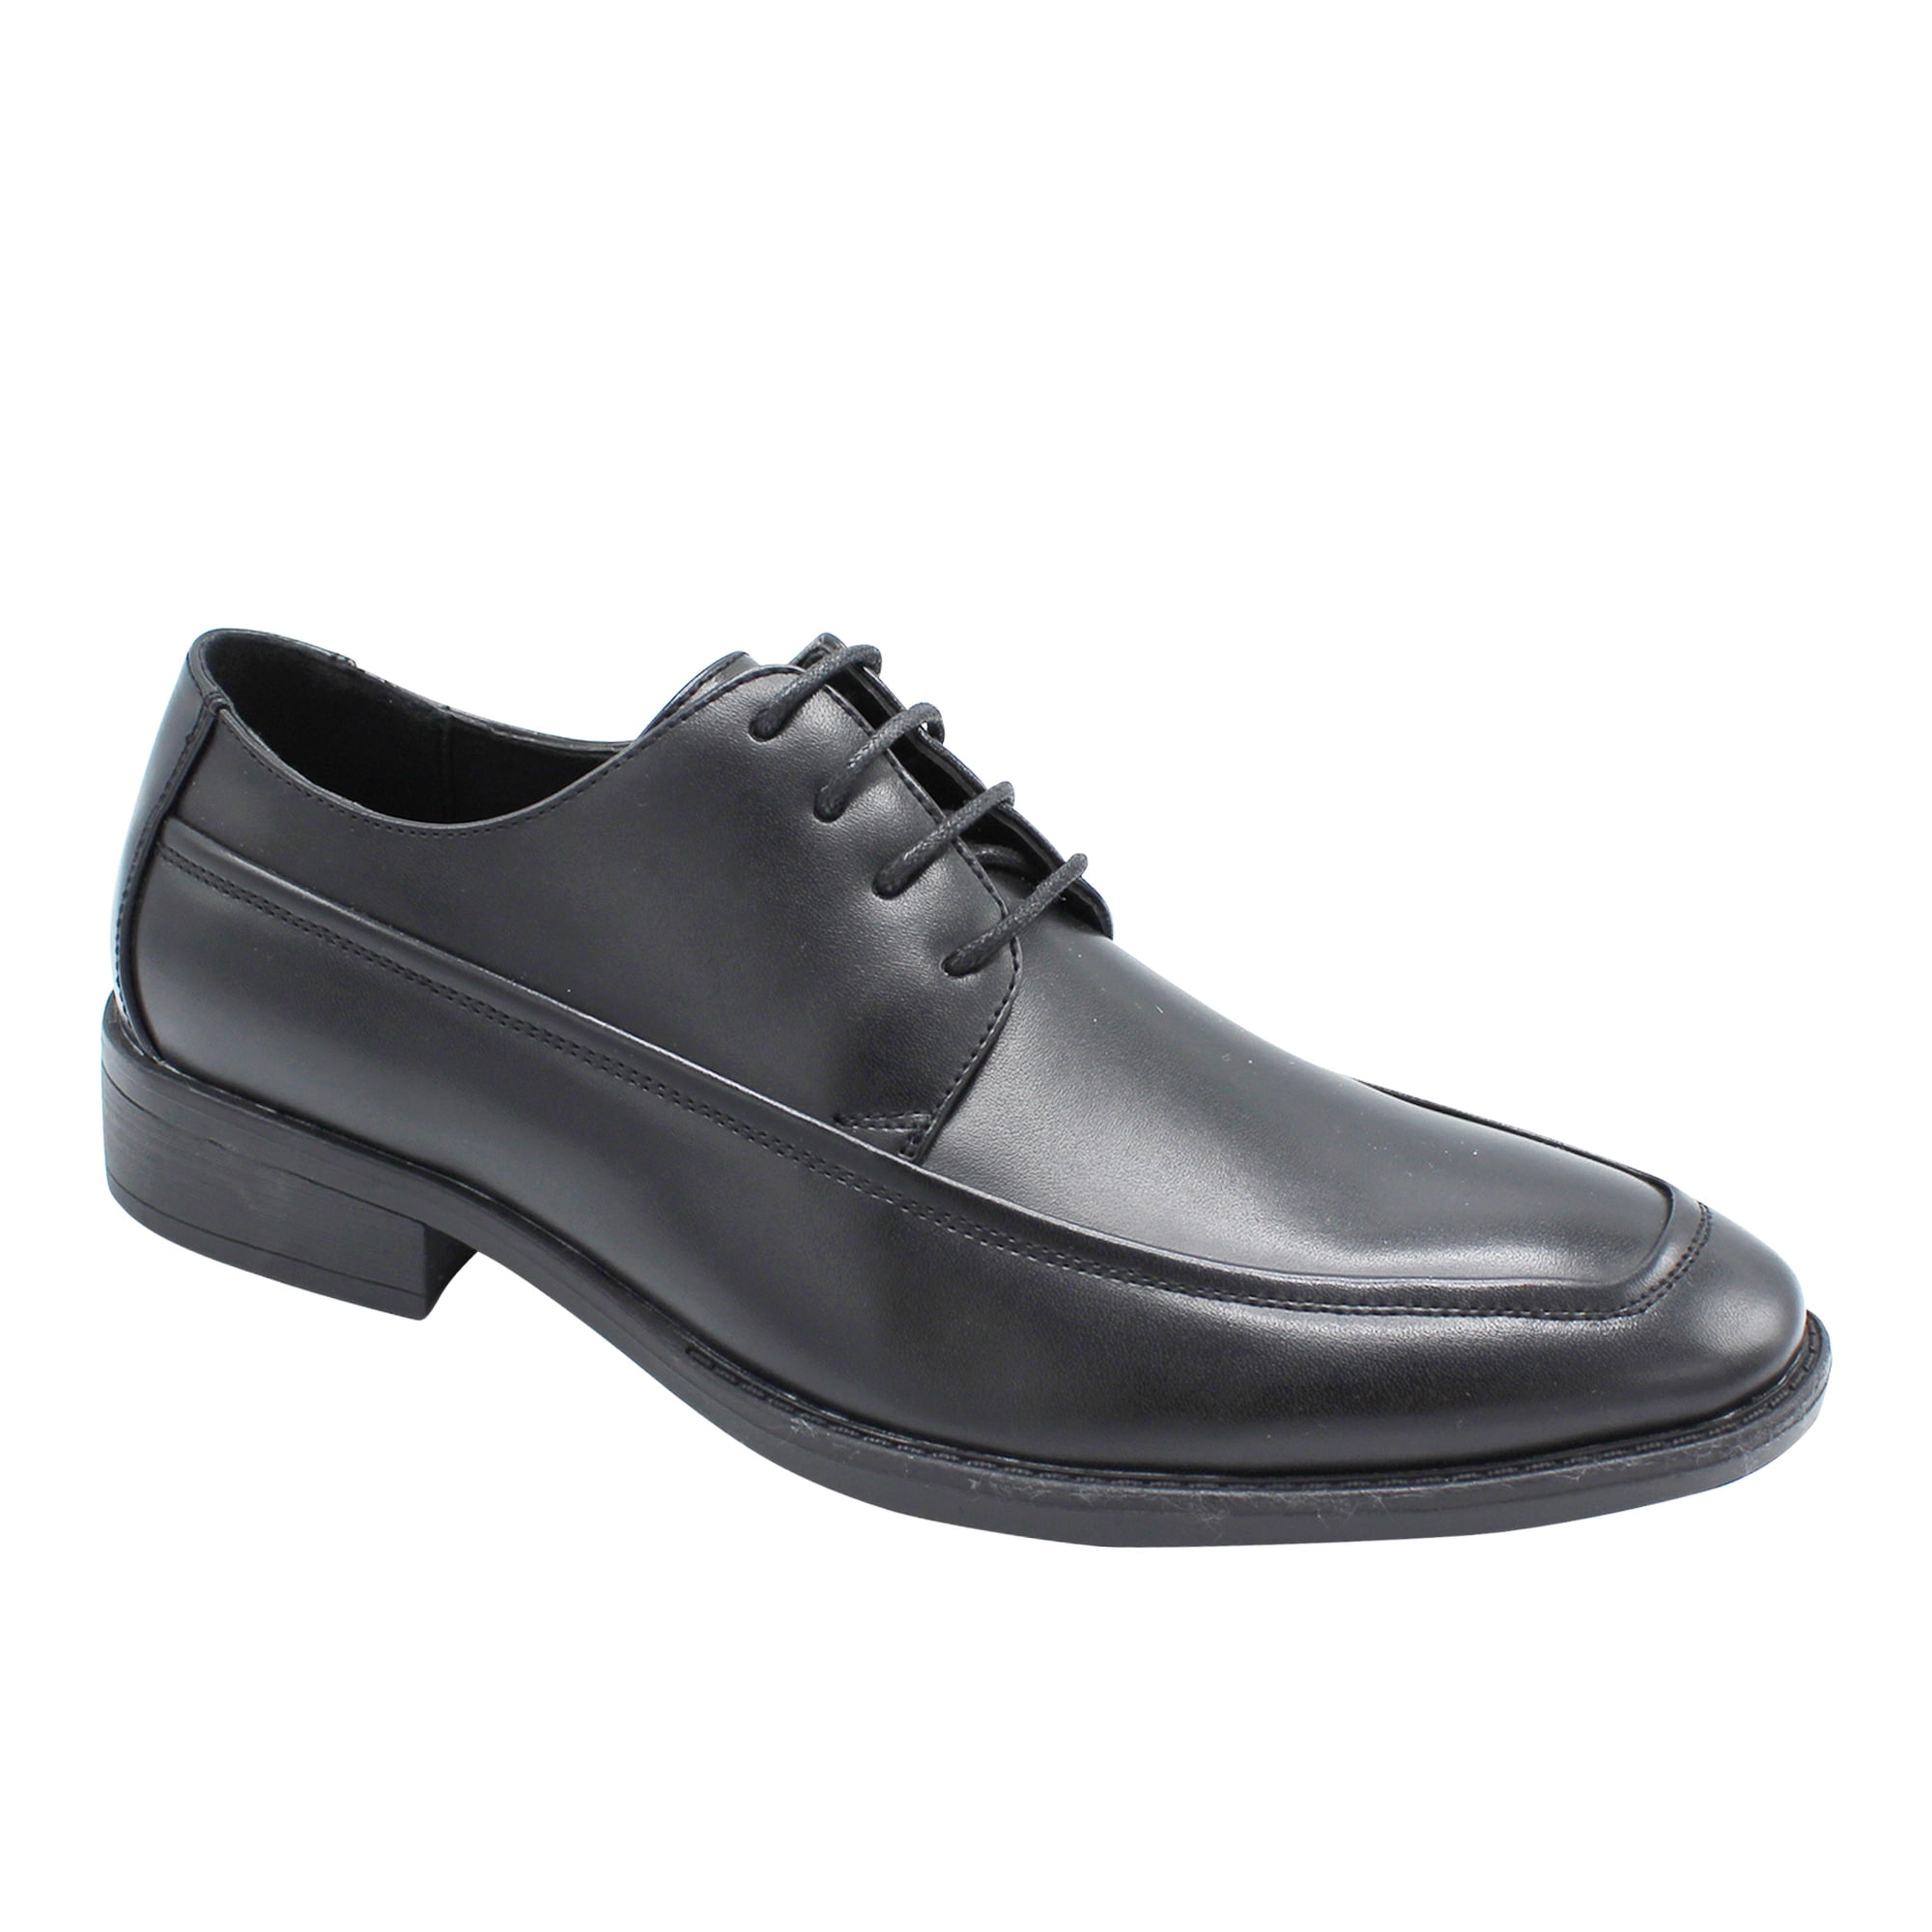 comfortable dress up shoes